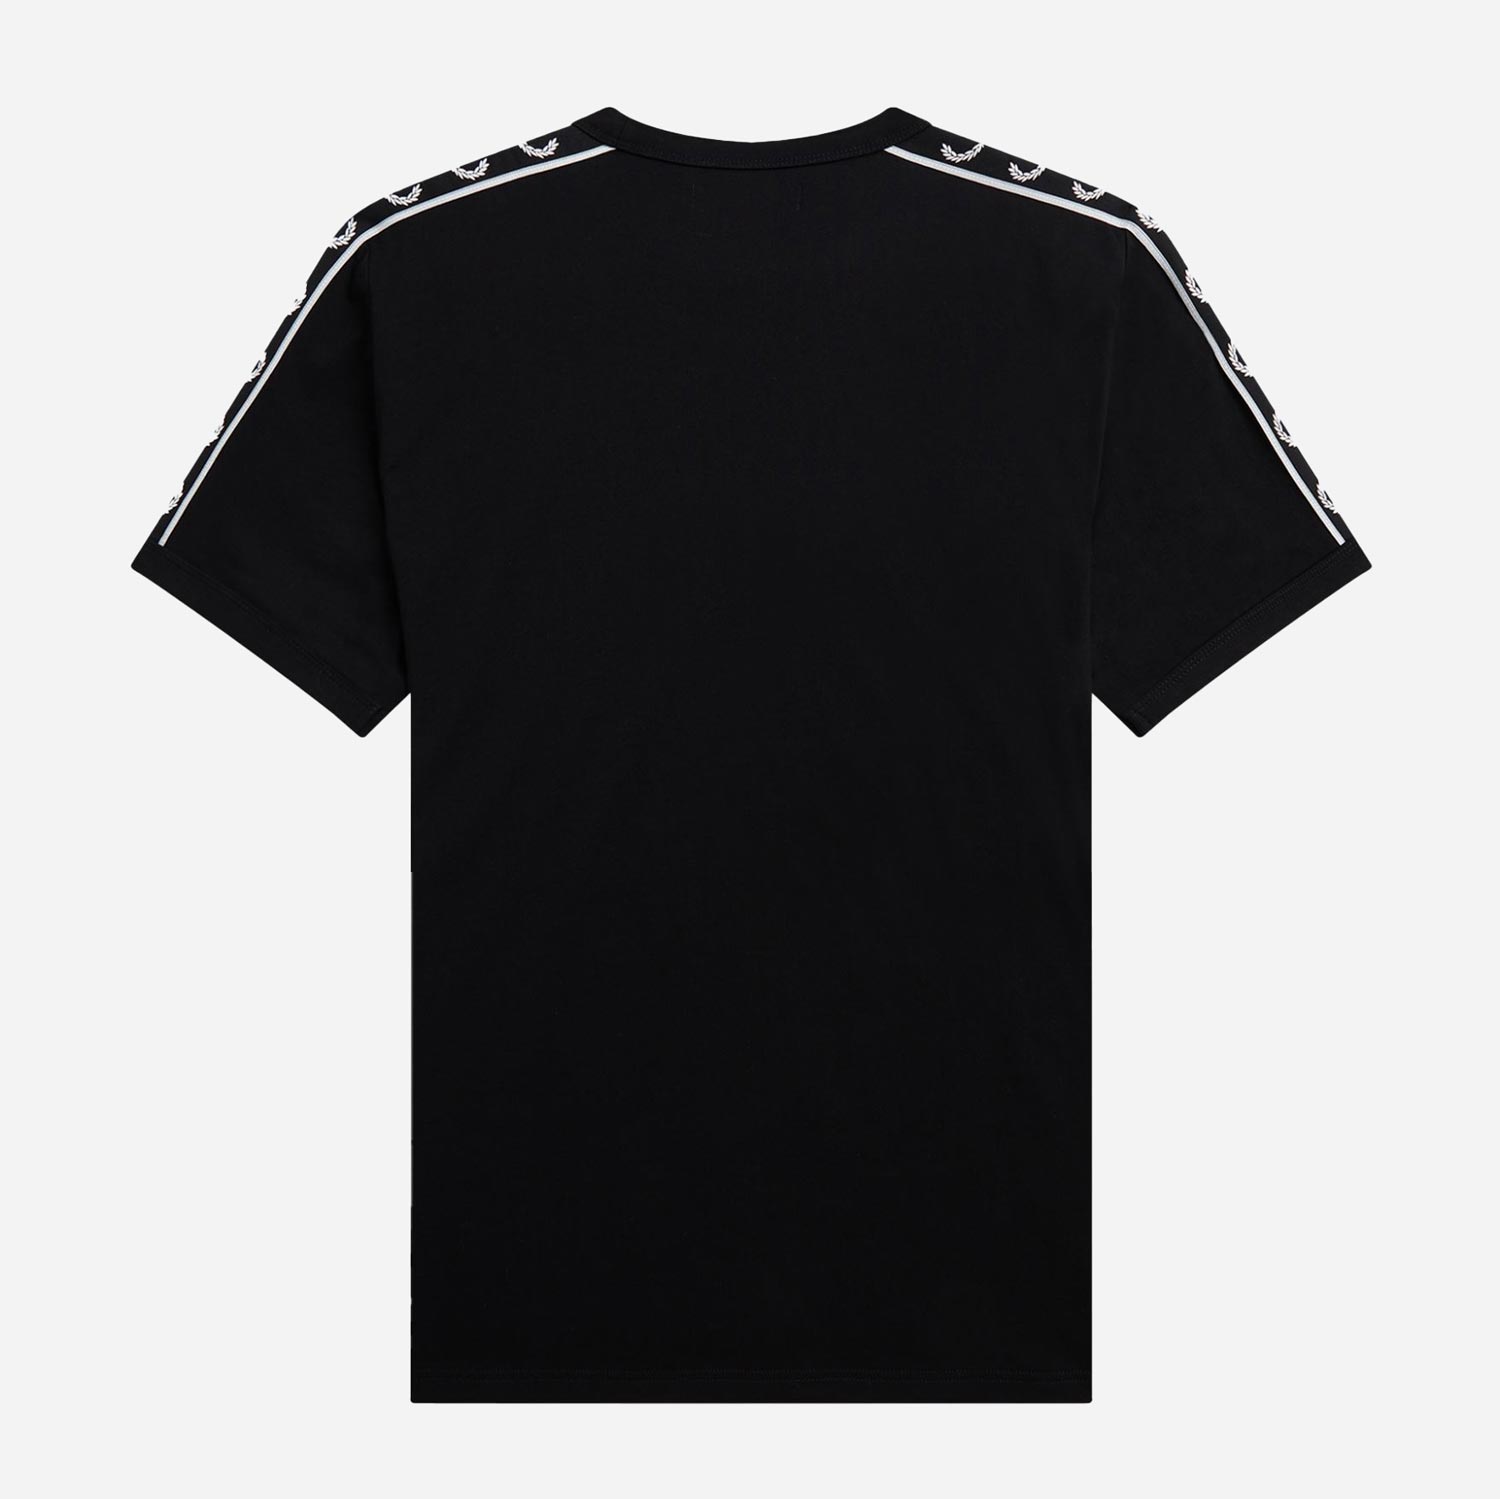 Fred Perry Contrast Tape Ringer Tee - Black/Black